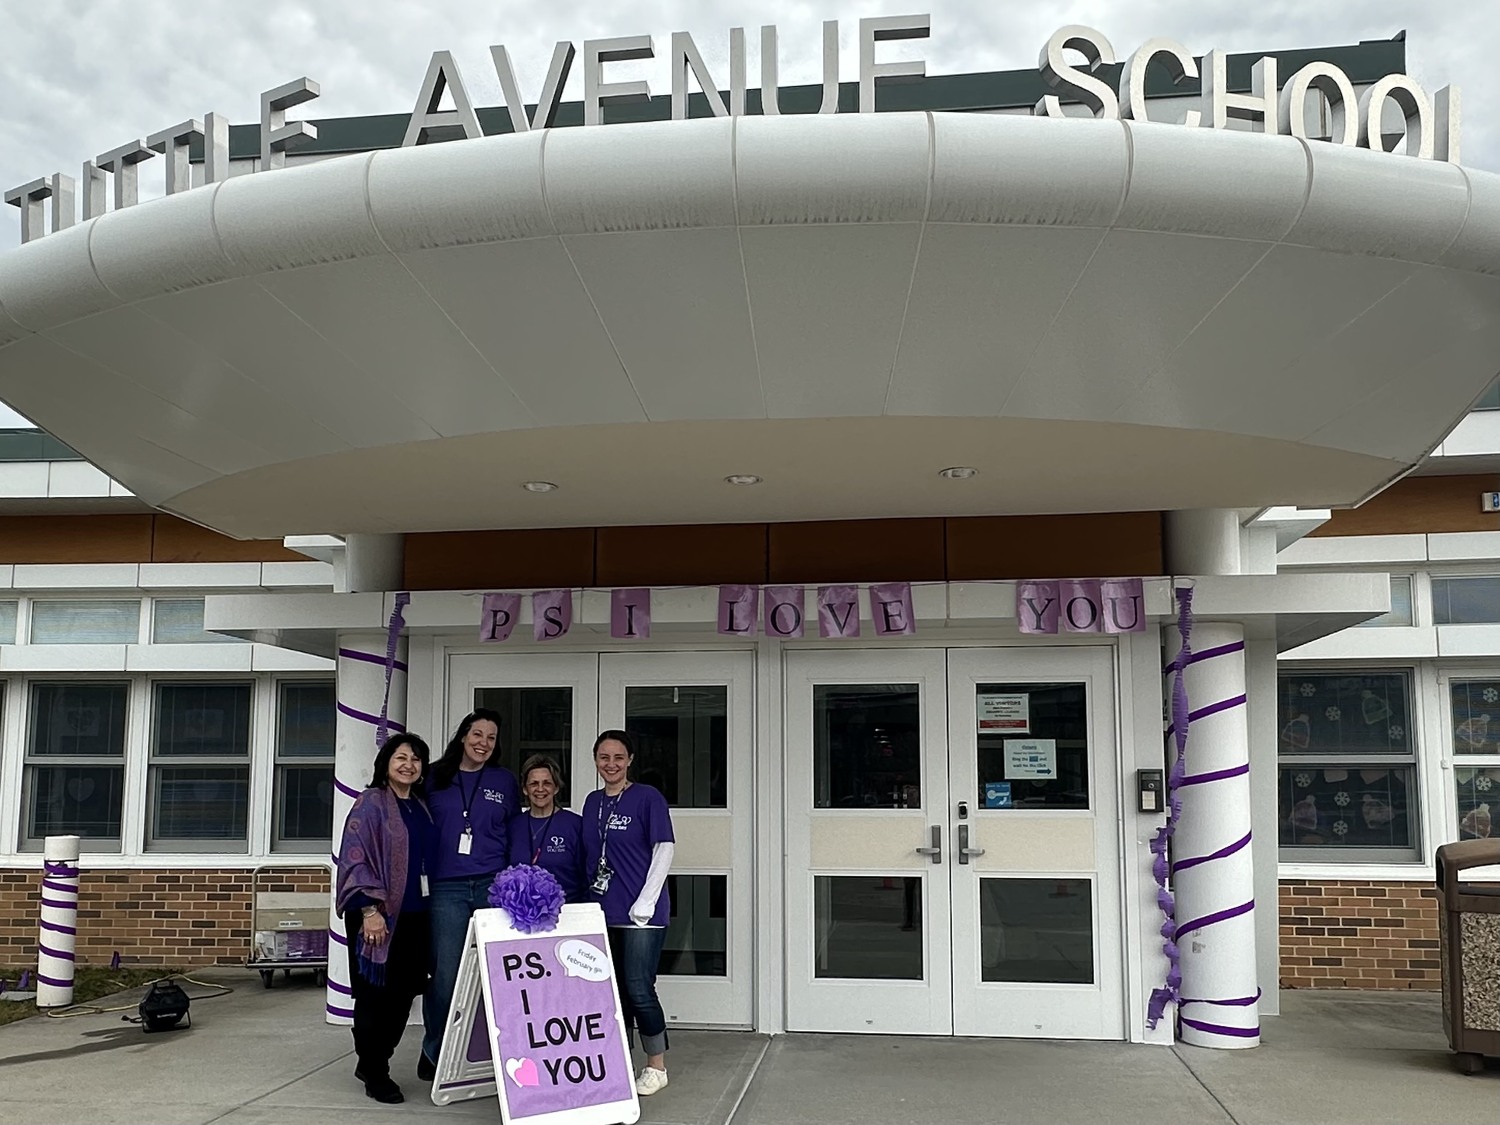 Tuttle Avenue Elementary School faculty welcomed students with love and kindness on P.S. I Love You Day. COURTESY EASTPORT-SOUTH MANOR SCHOOL DISTRICT